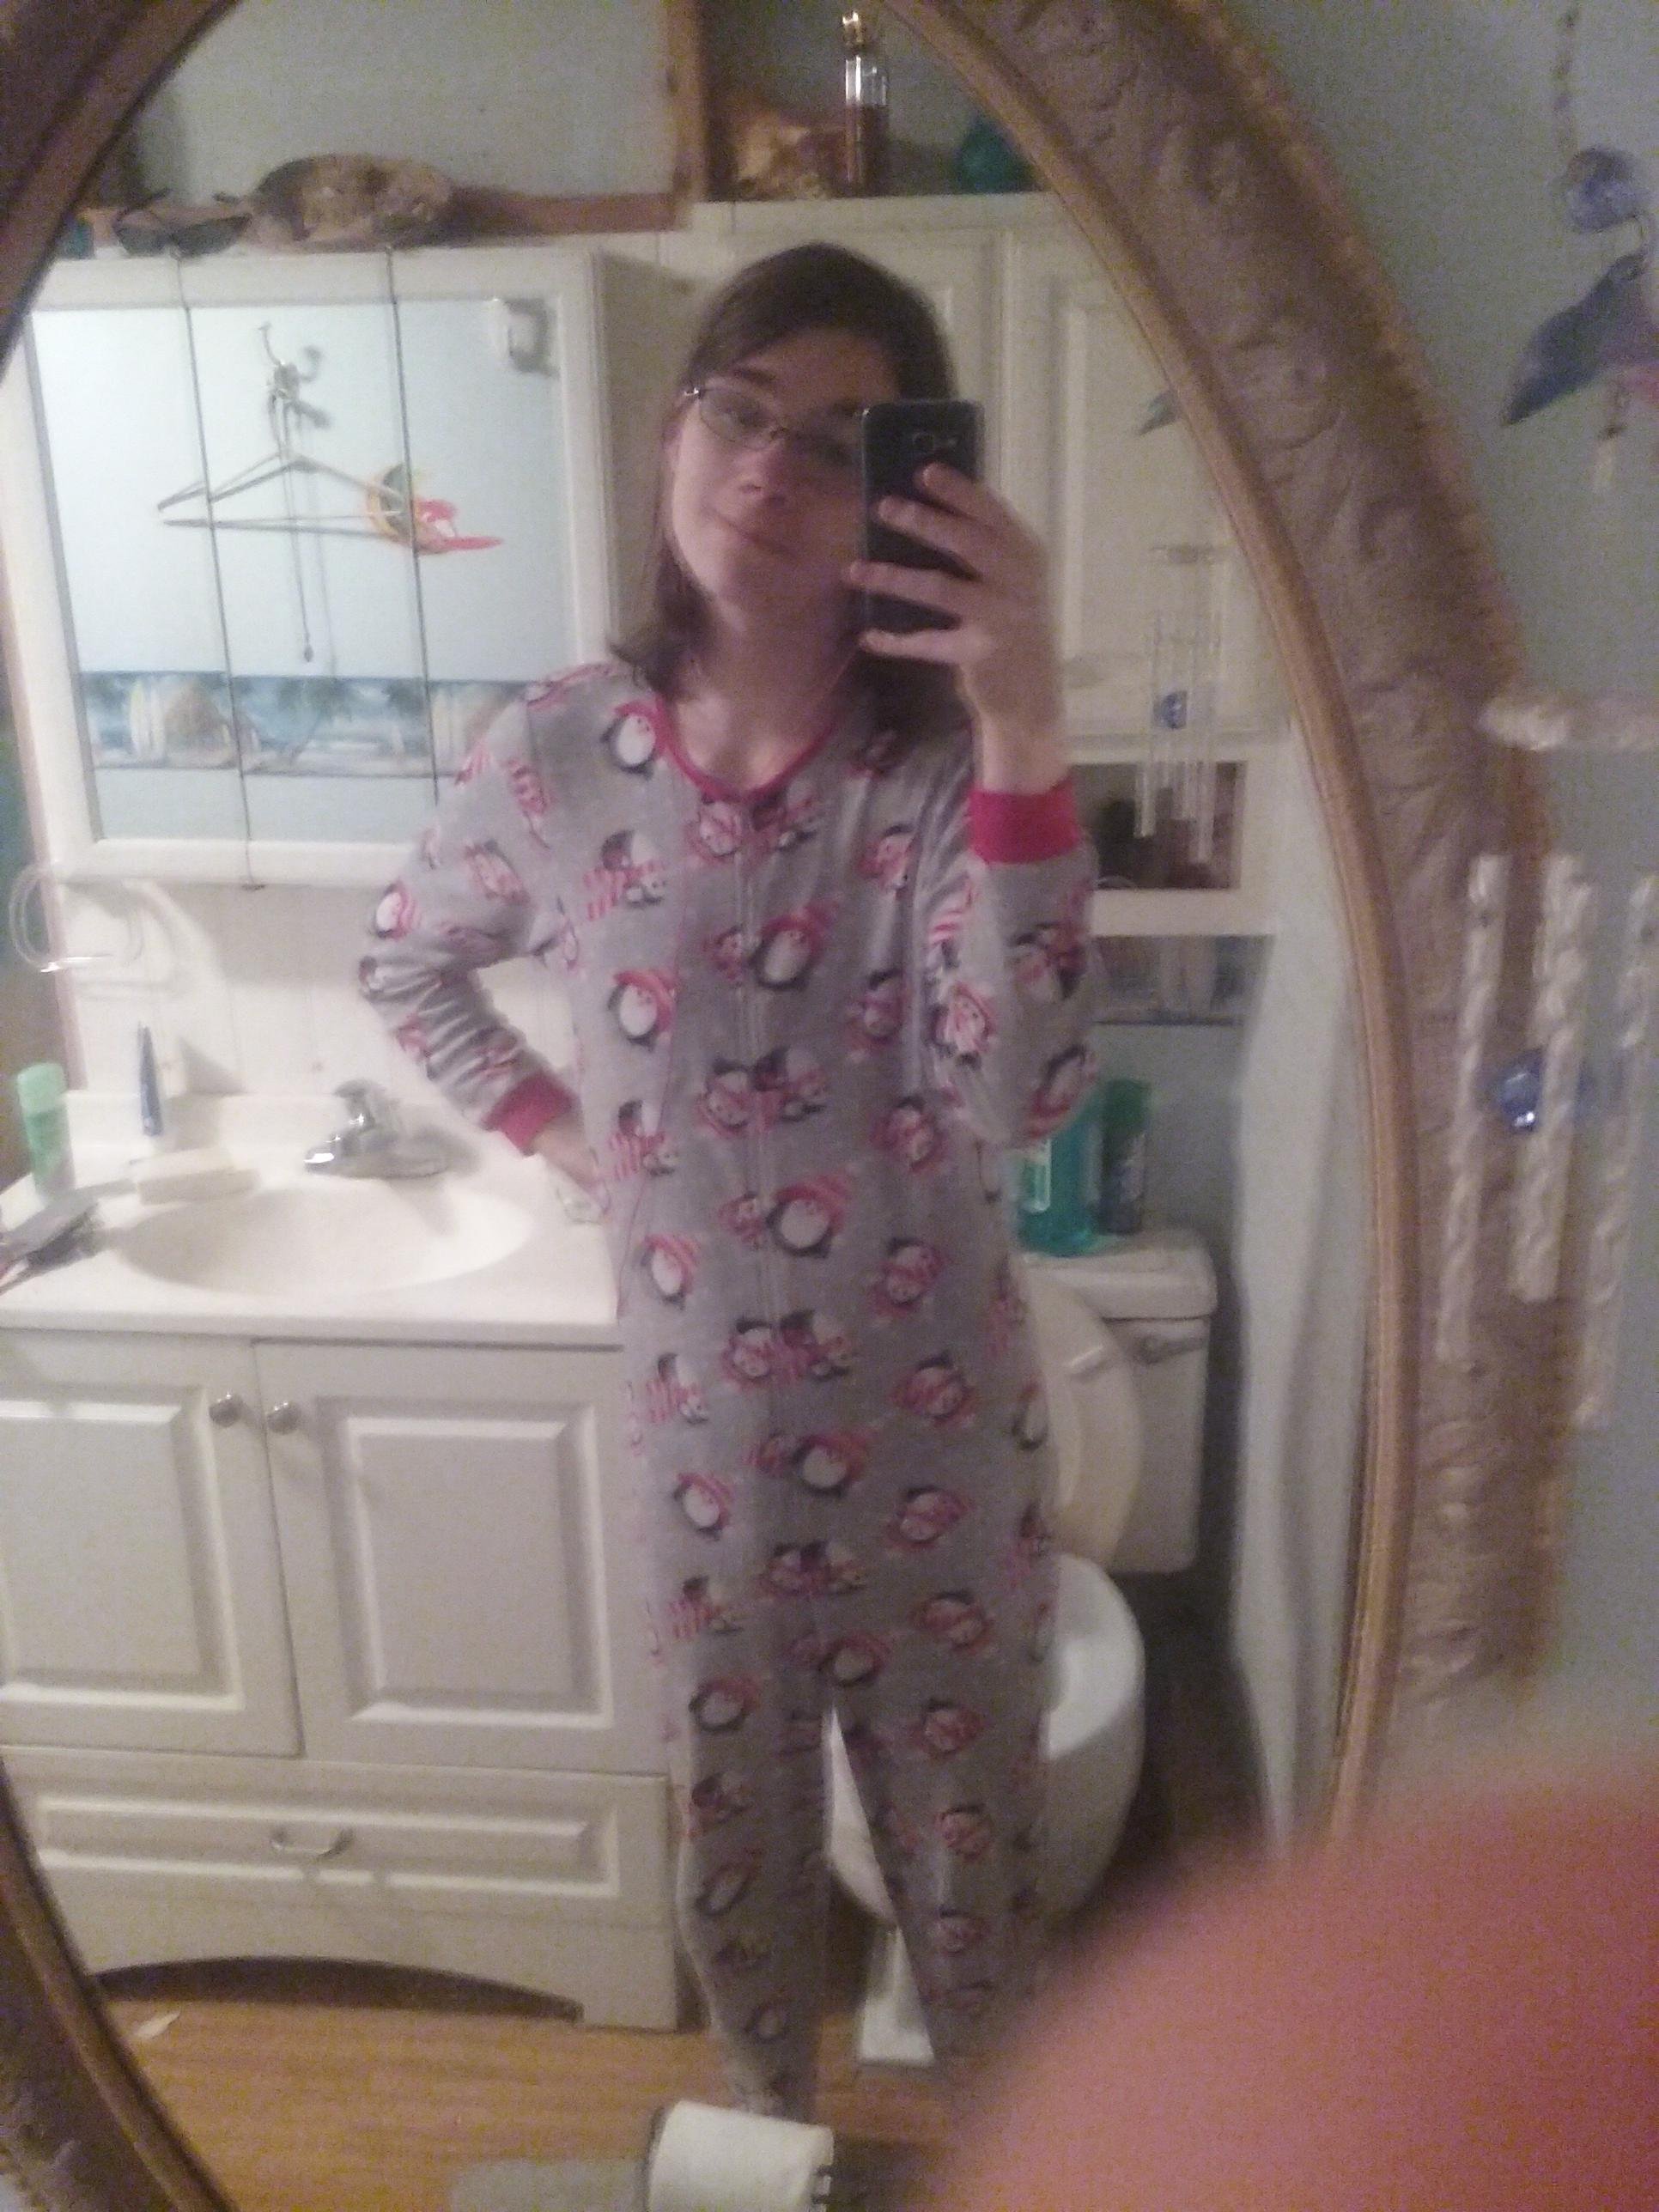 New here deciding to show off my onesie